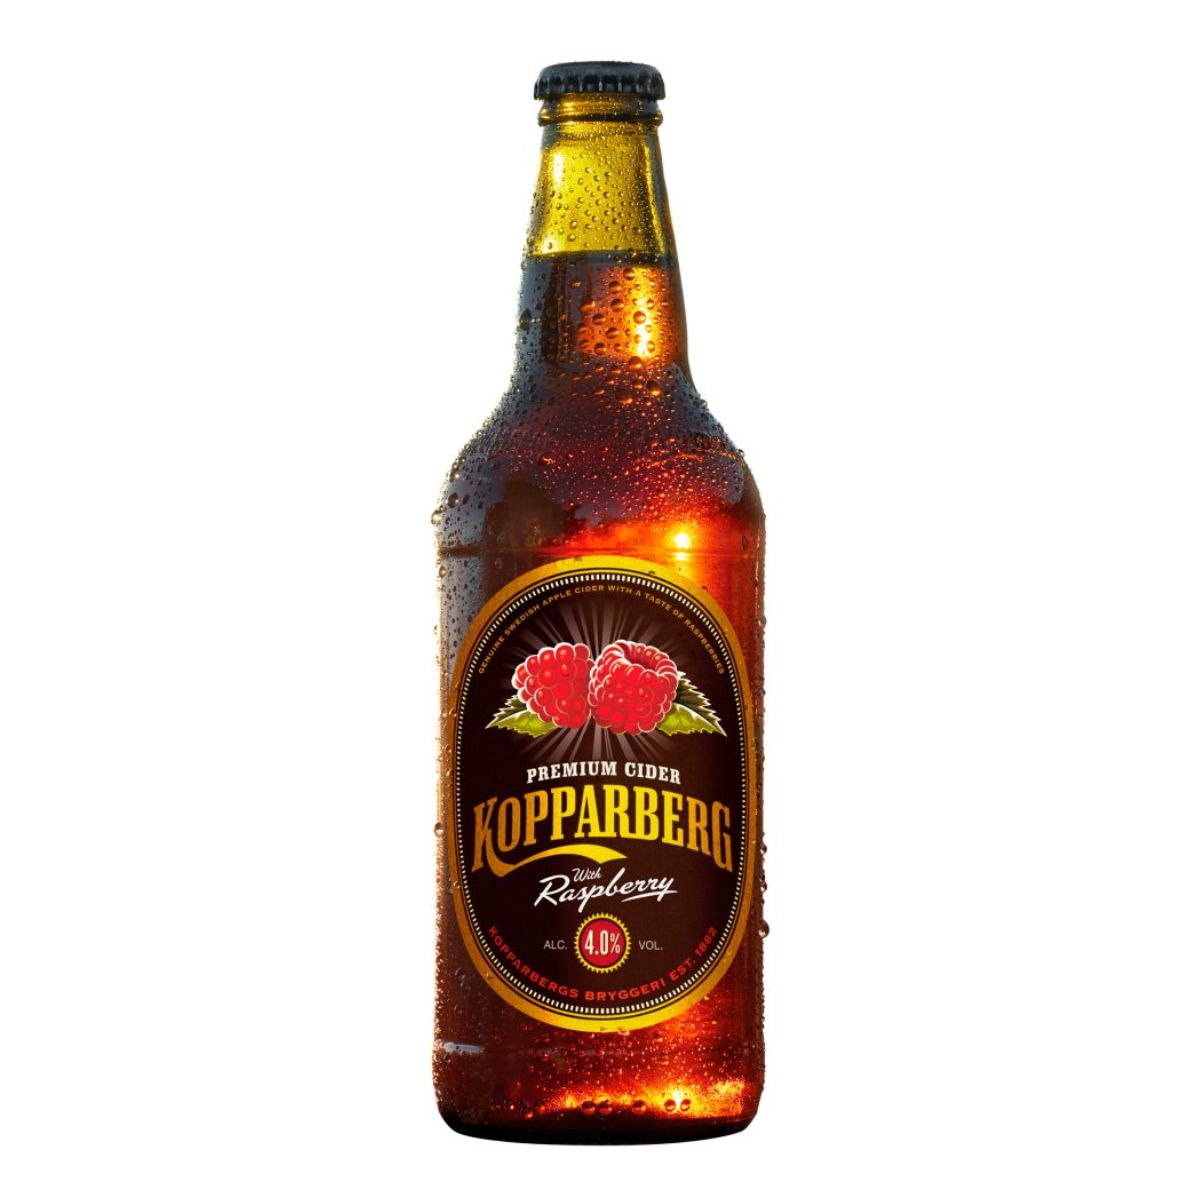 A bottle of Kopparberg - Premium Cider with Raspberry (4.0% ABV) - 500ml on a white background.